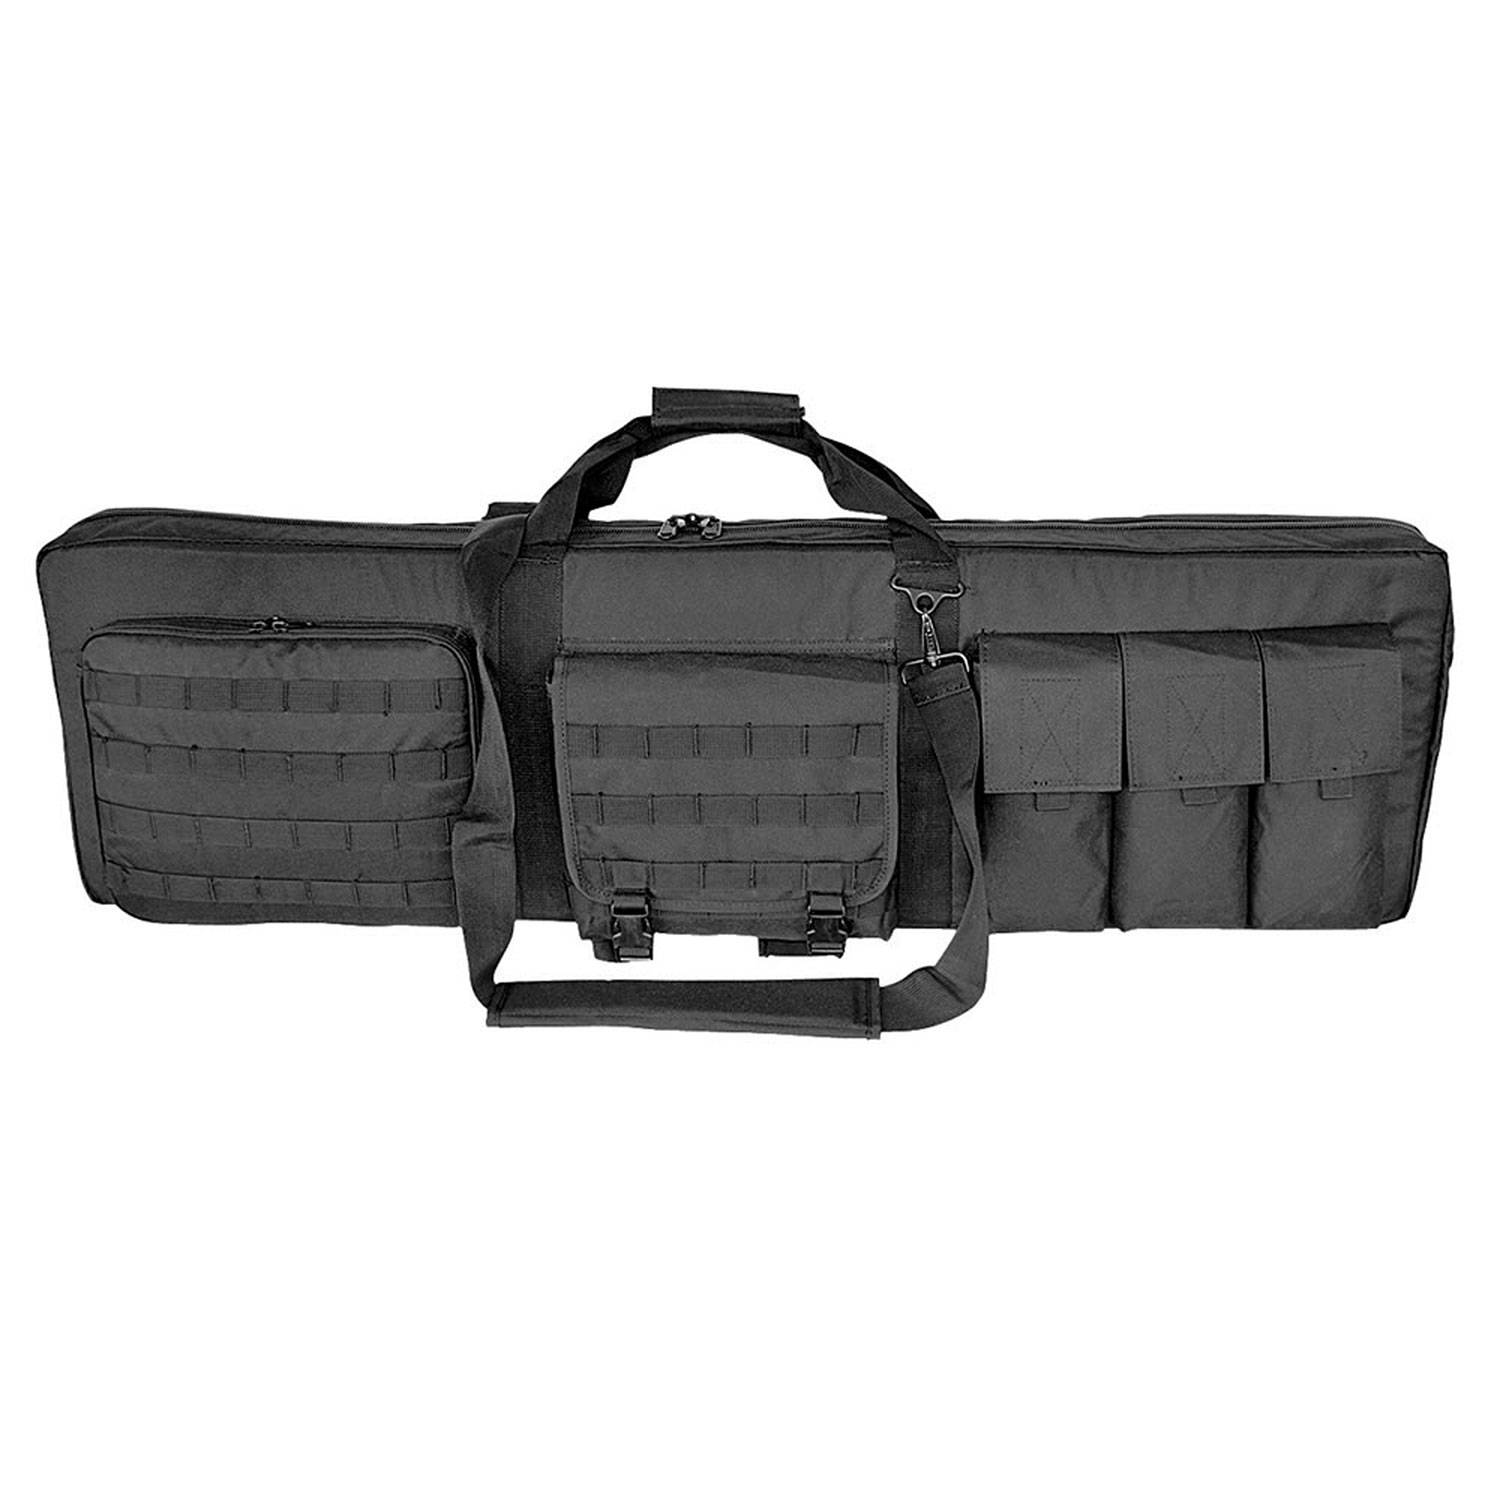 EXTREME VALUE 36" DOUBLE RIFLE CASE WITH MAT